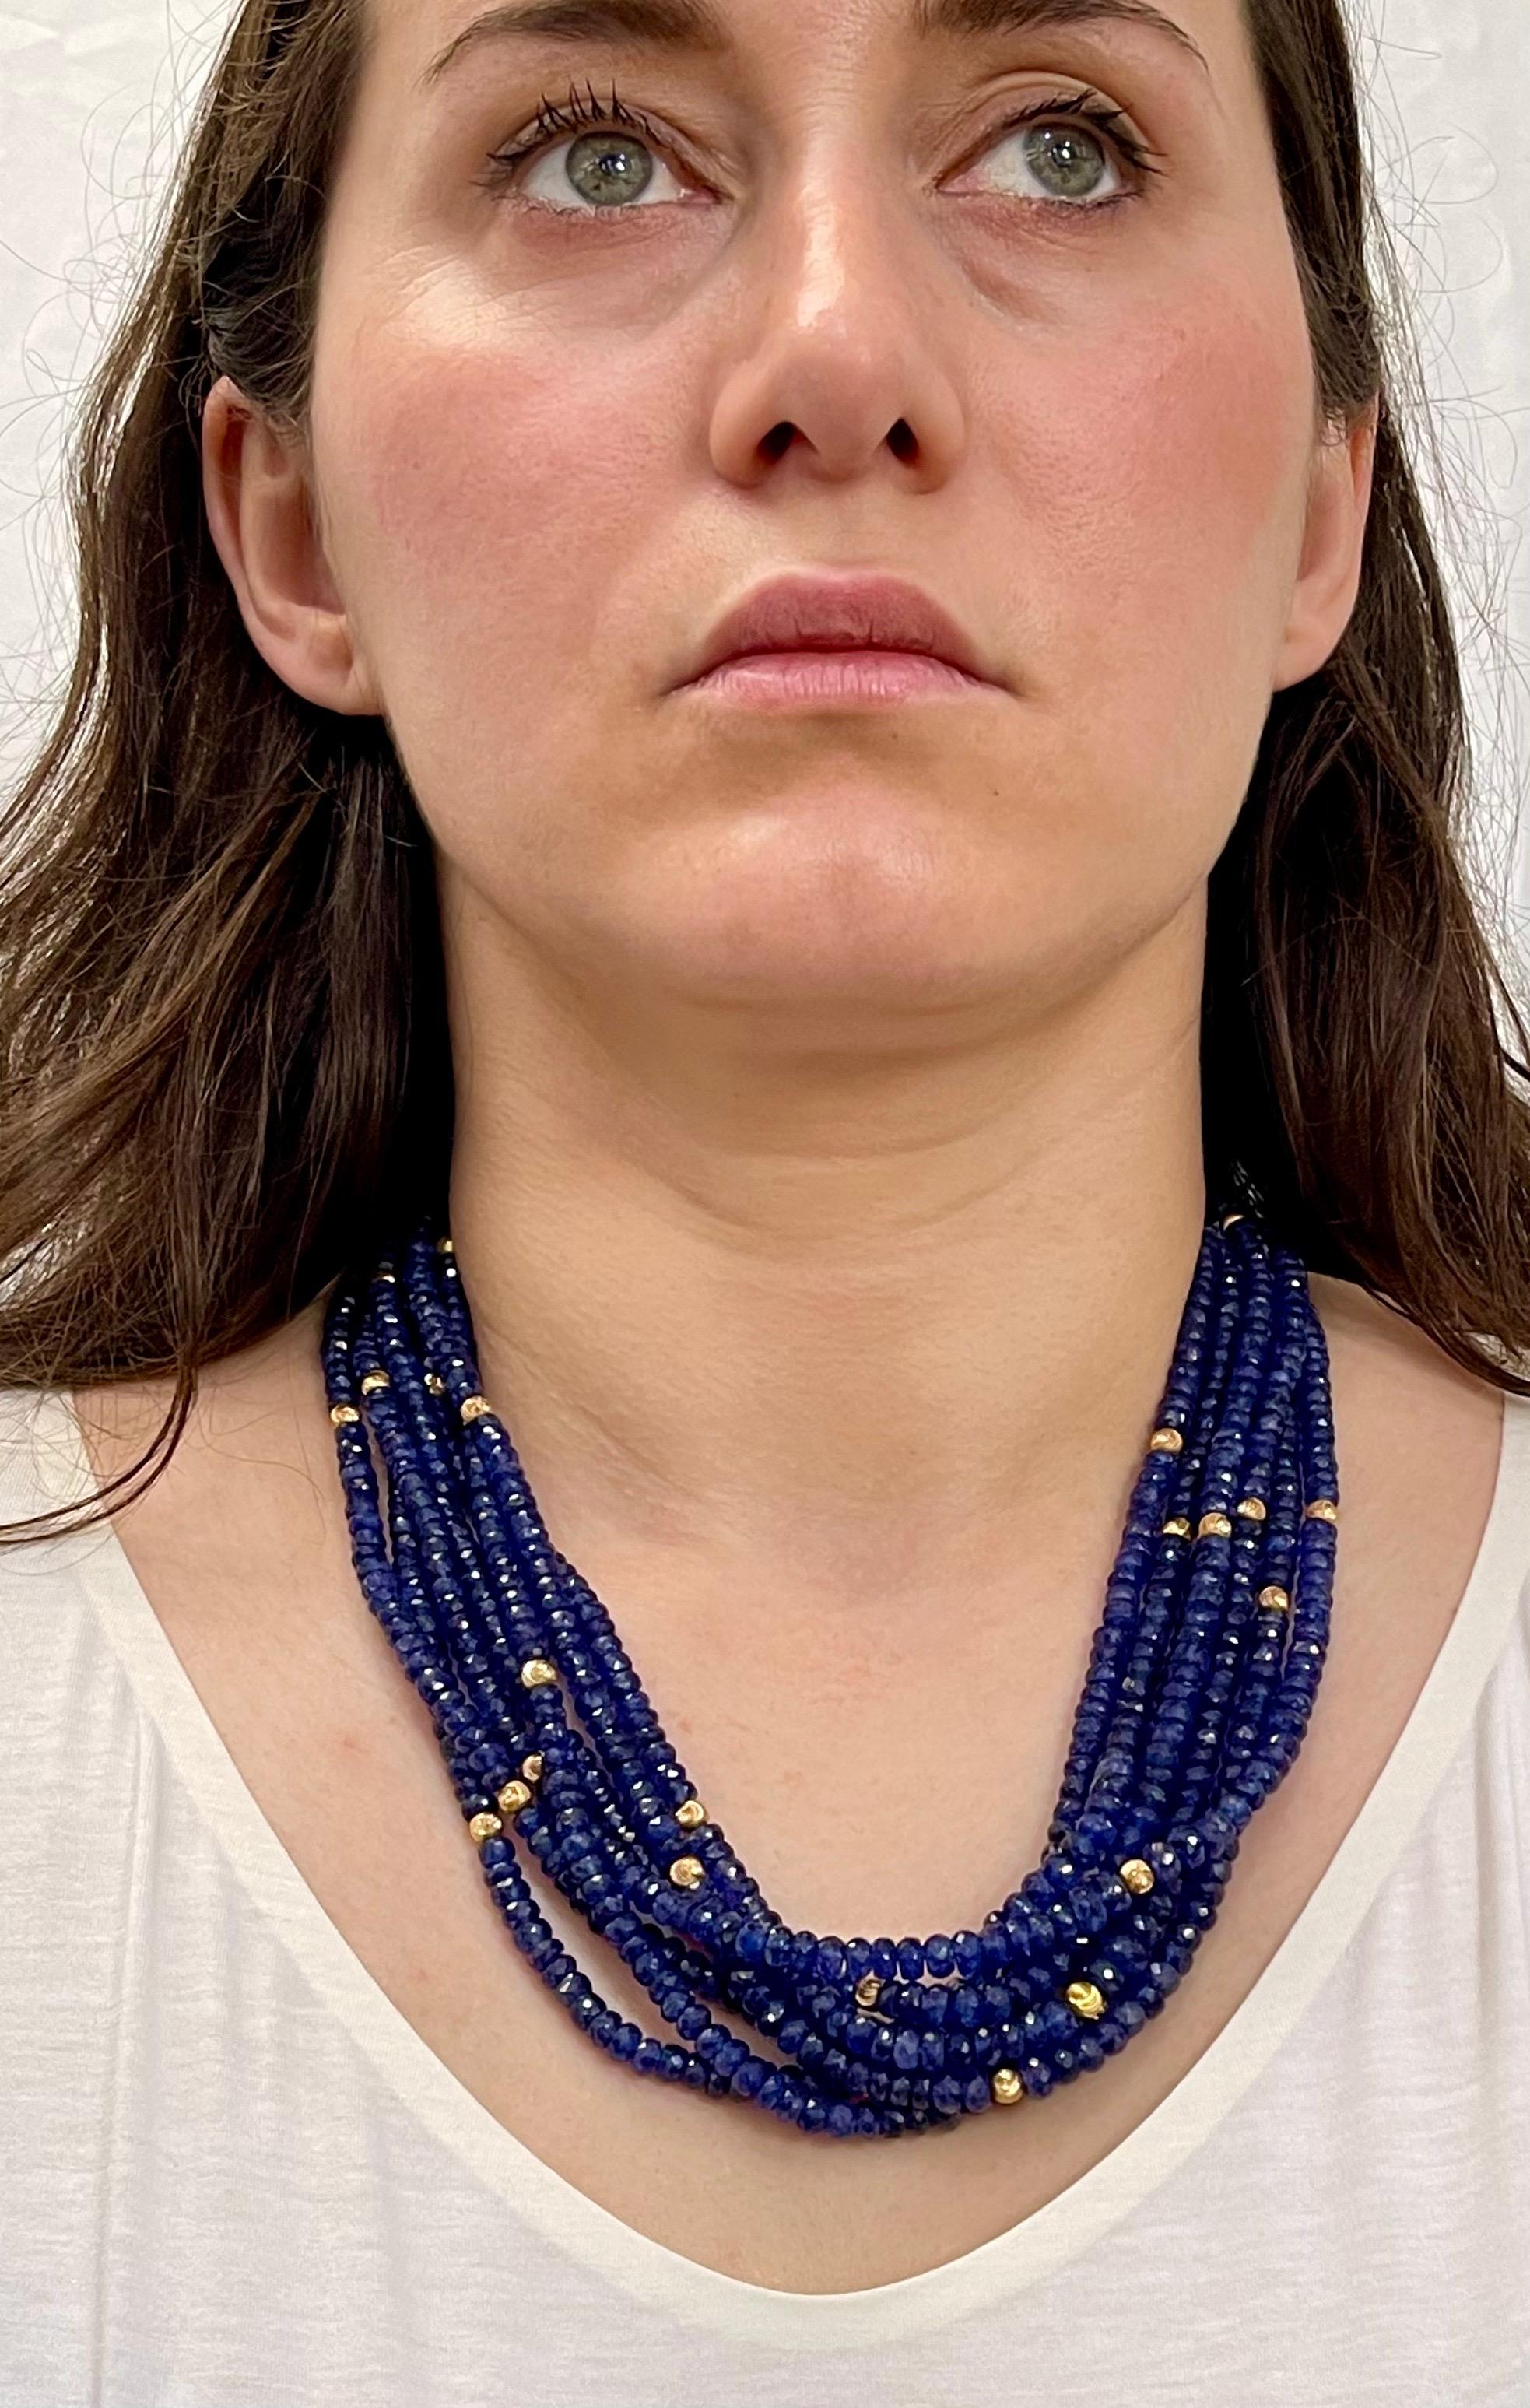 Women's Twisted 1275 Ct Natural Tanzanite Bead Seven Strand Necklace + 15 Gm 14 K Y Gold For Sale